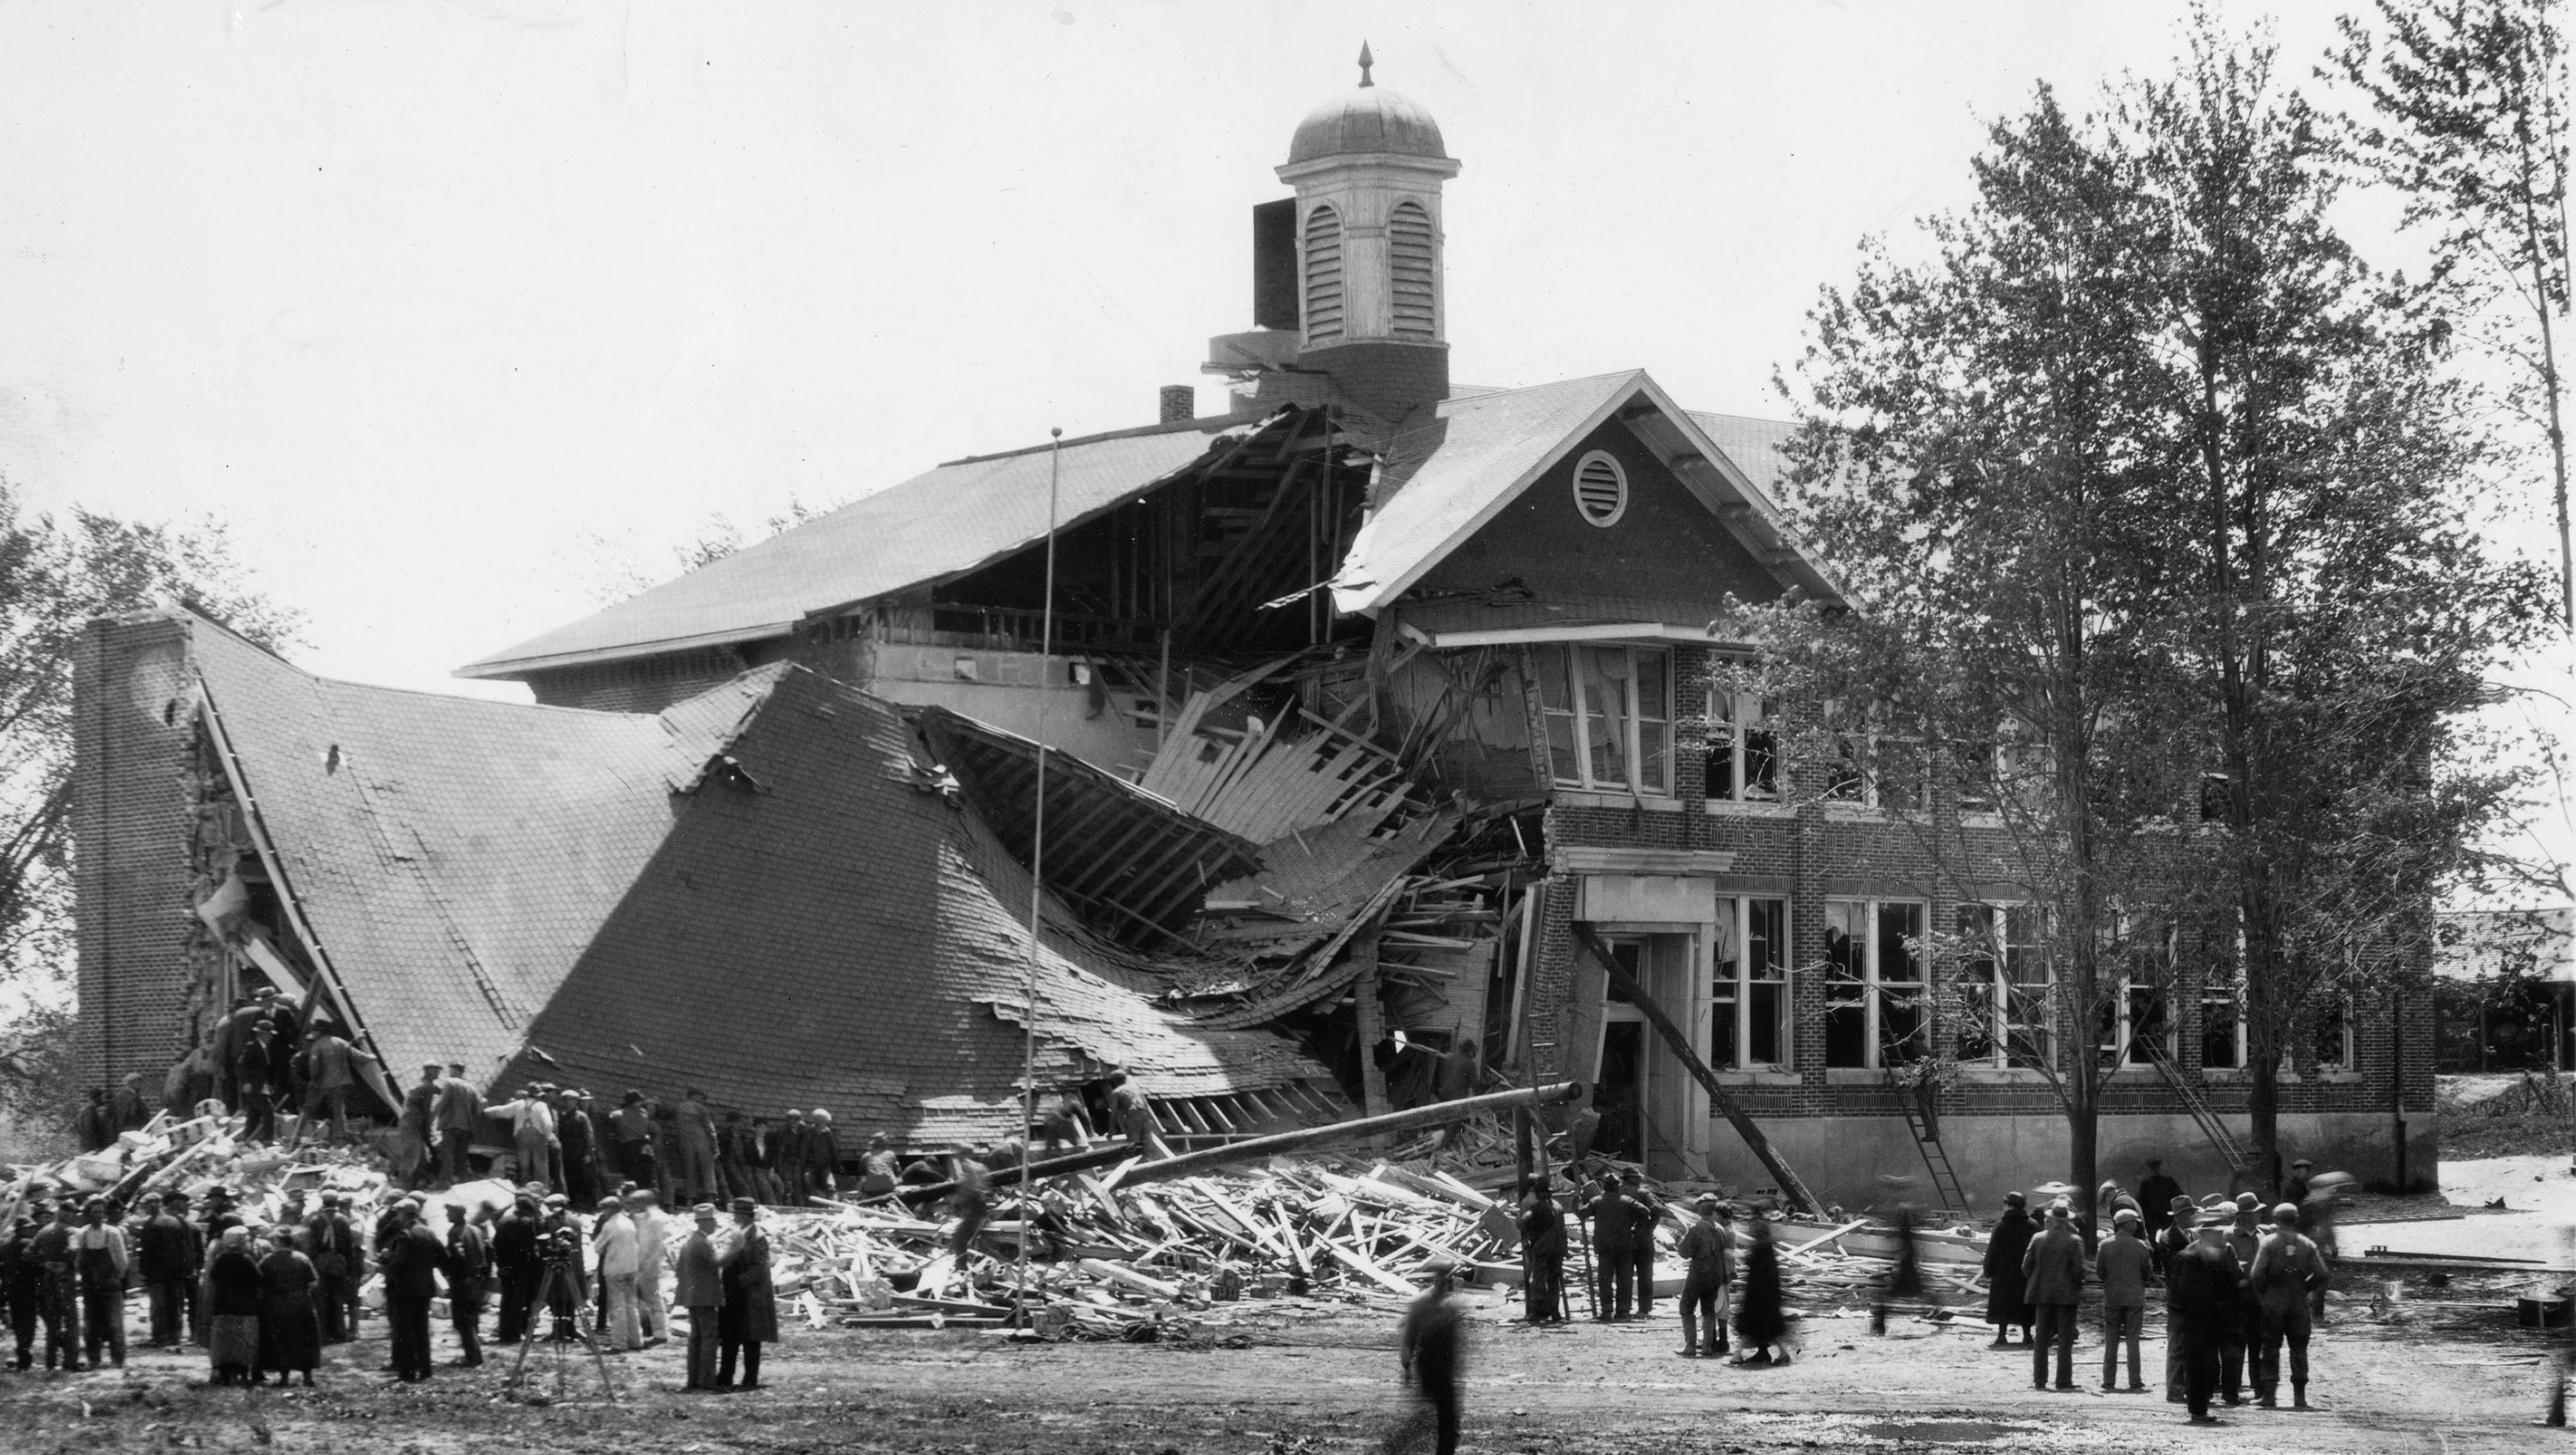 Bath School Disaster 89th anniversary of the deadliest act of mass